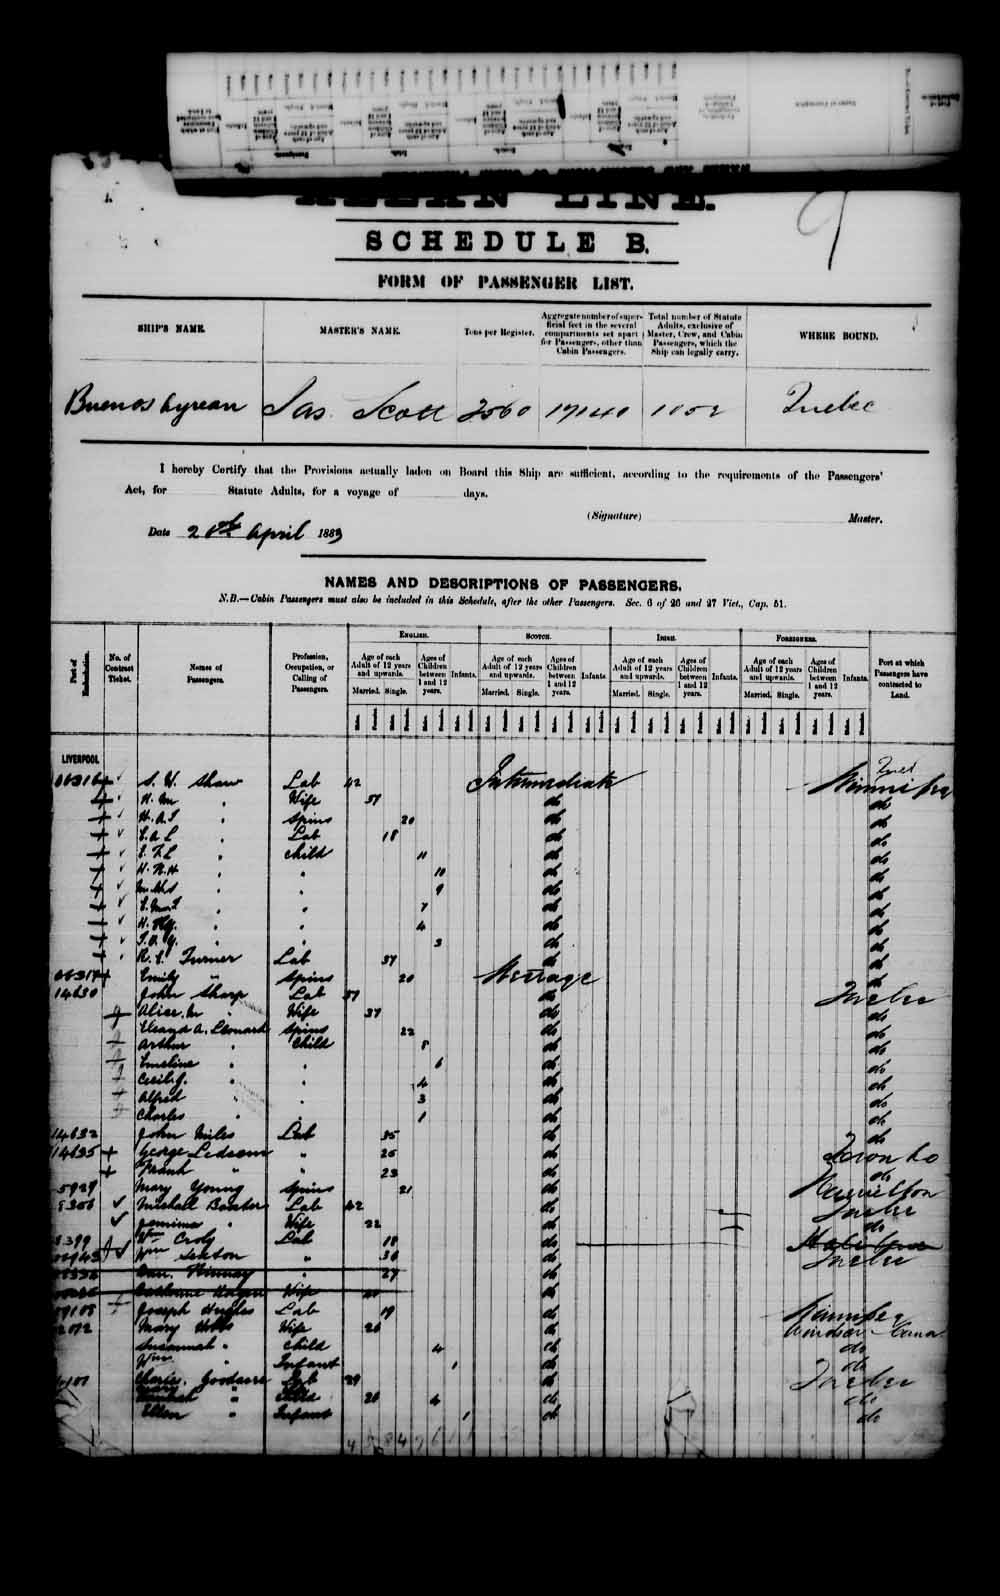 Digitized page of Passenger Lists for Image No.: e003542775